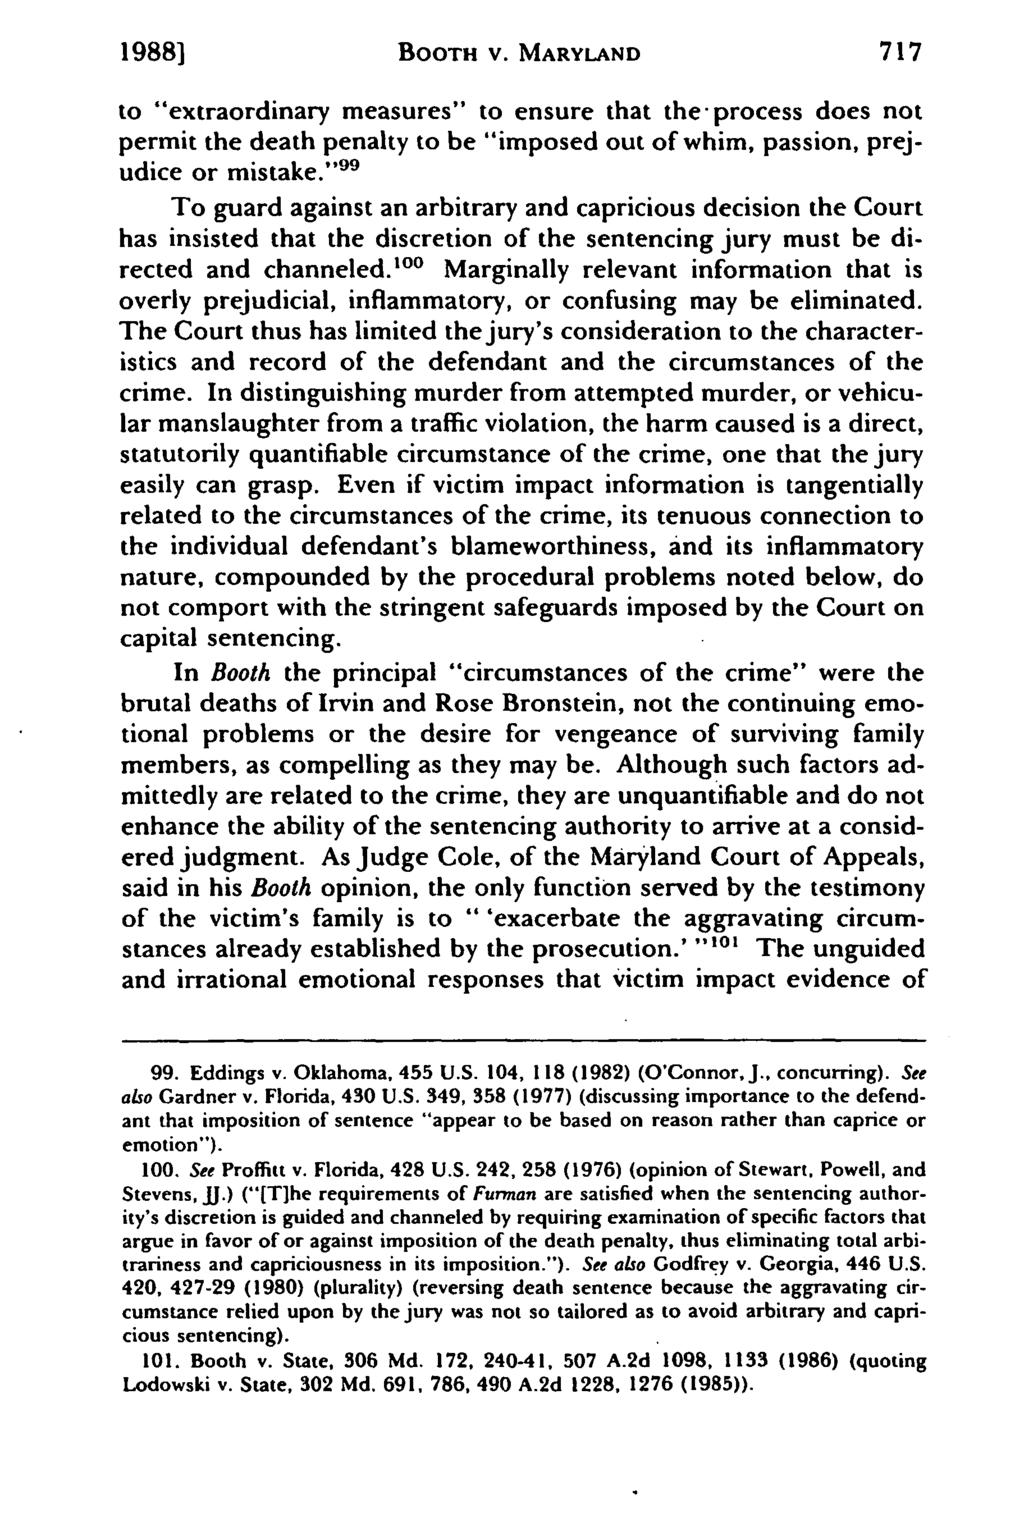 1988] BOOTH V. MARYLAND to "extraordinary measures" to ensure that the-process does not permit the death penalty to be "imposed out of whim, passion, prejudice or mistake.